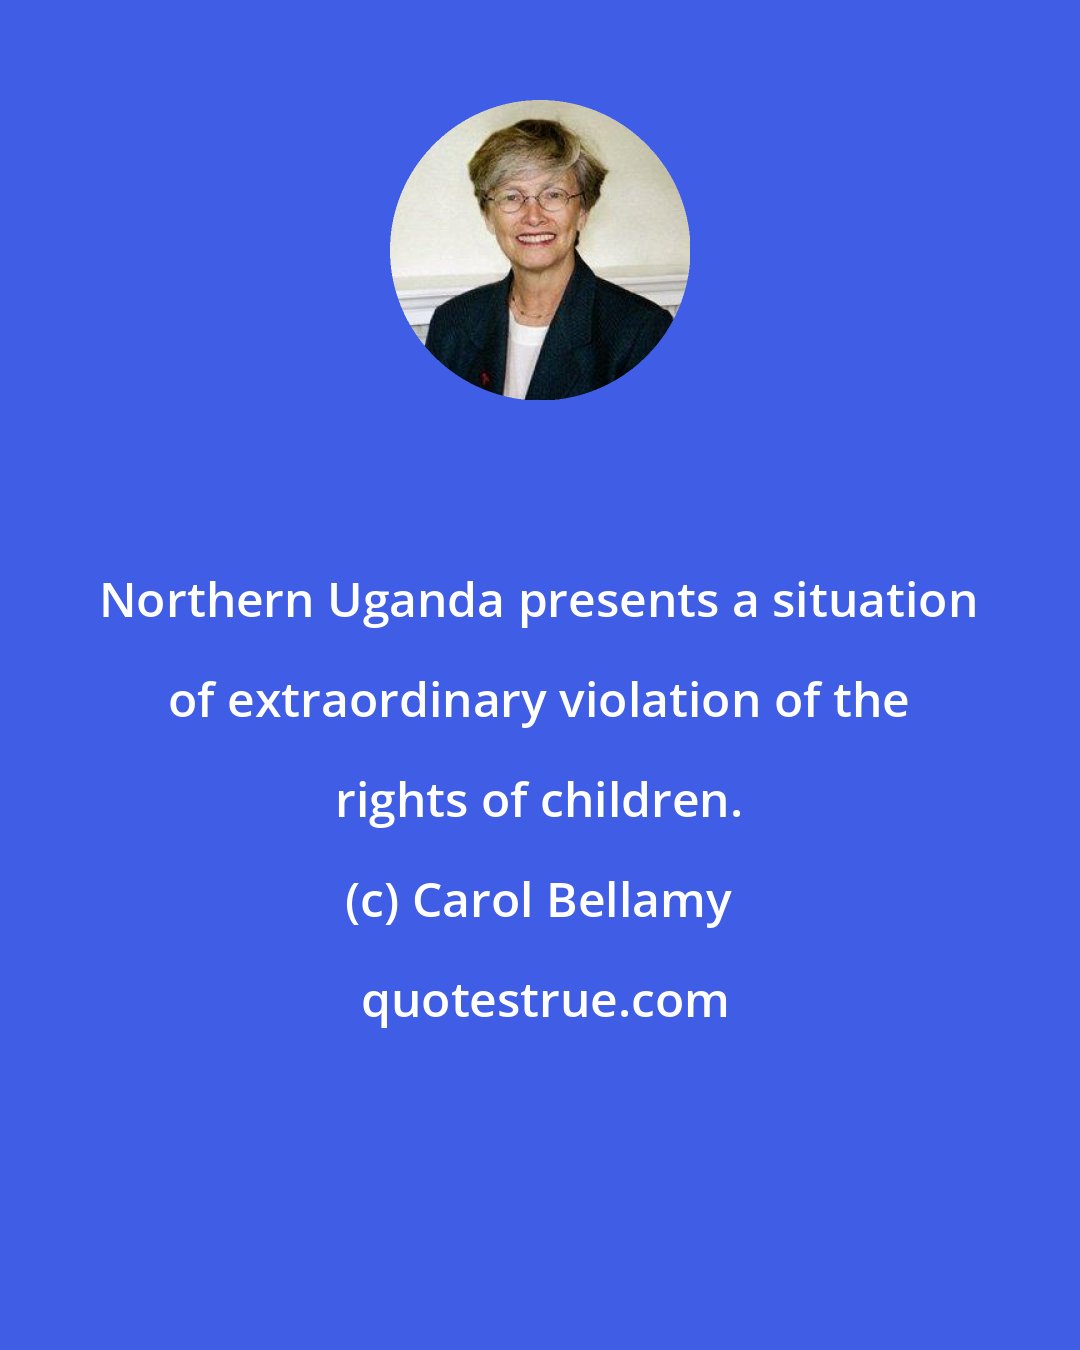 Carol Bellamy: Northern Uganda presents a situation of extraordinary violation of the rights of children.